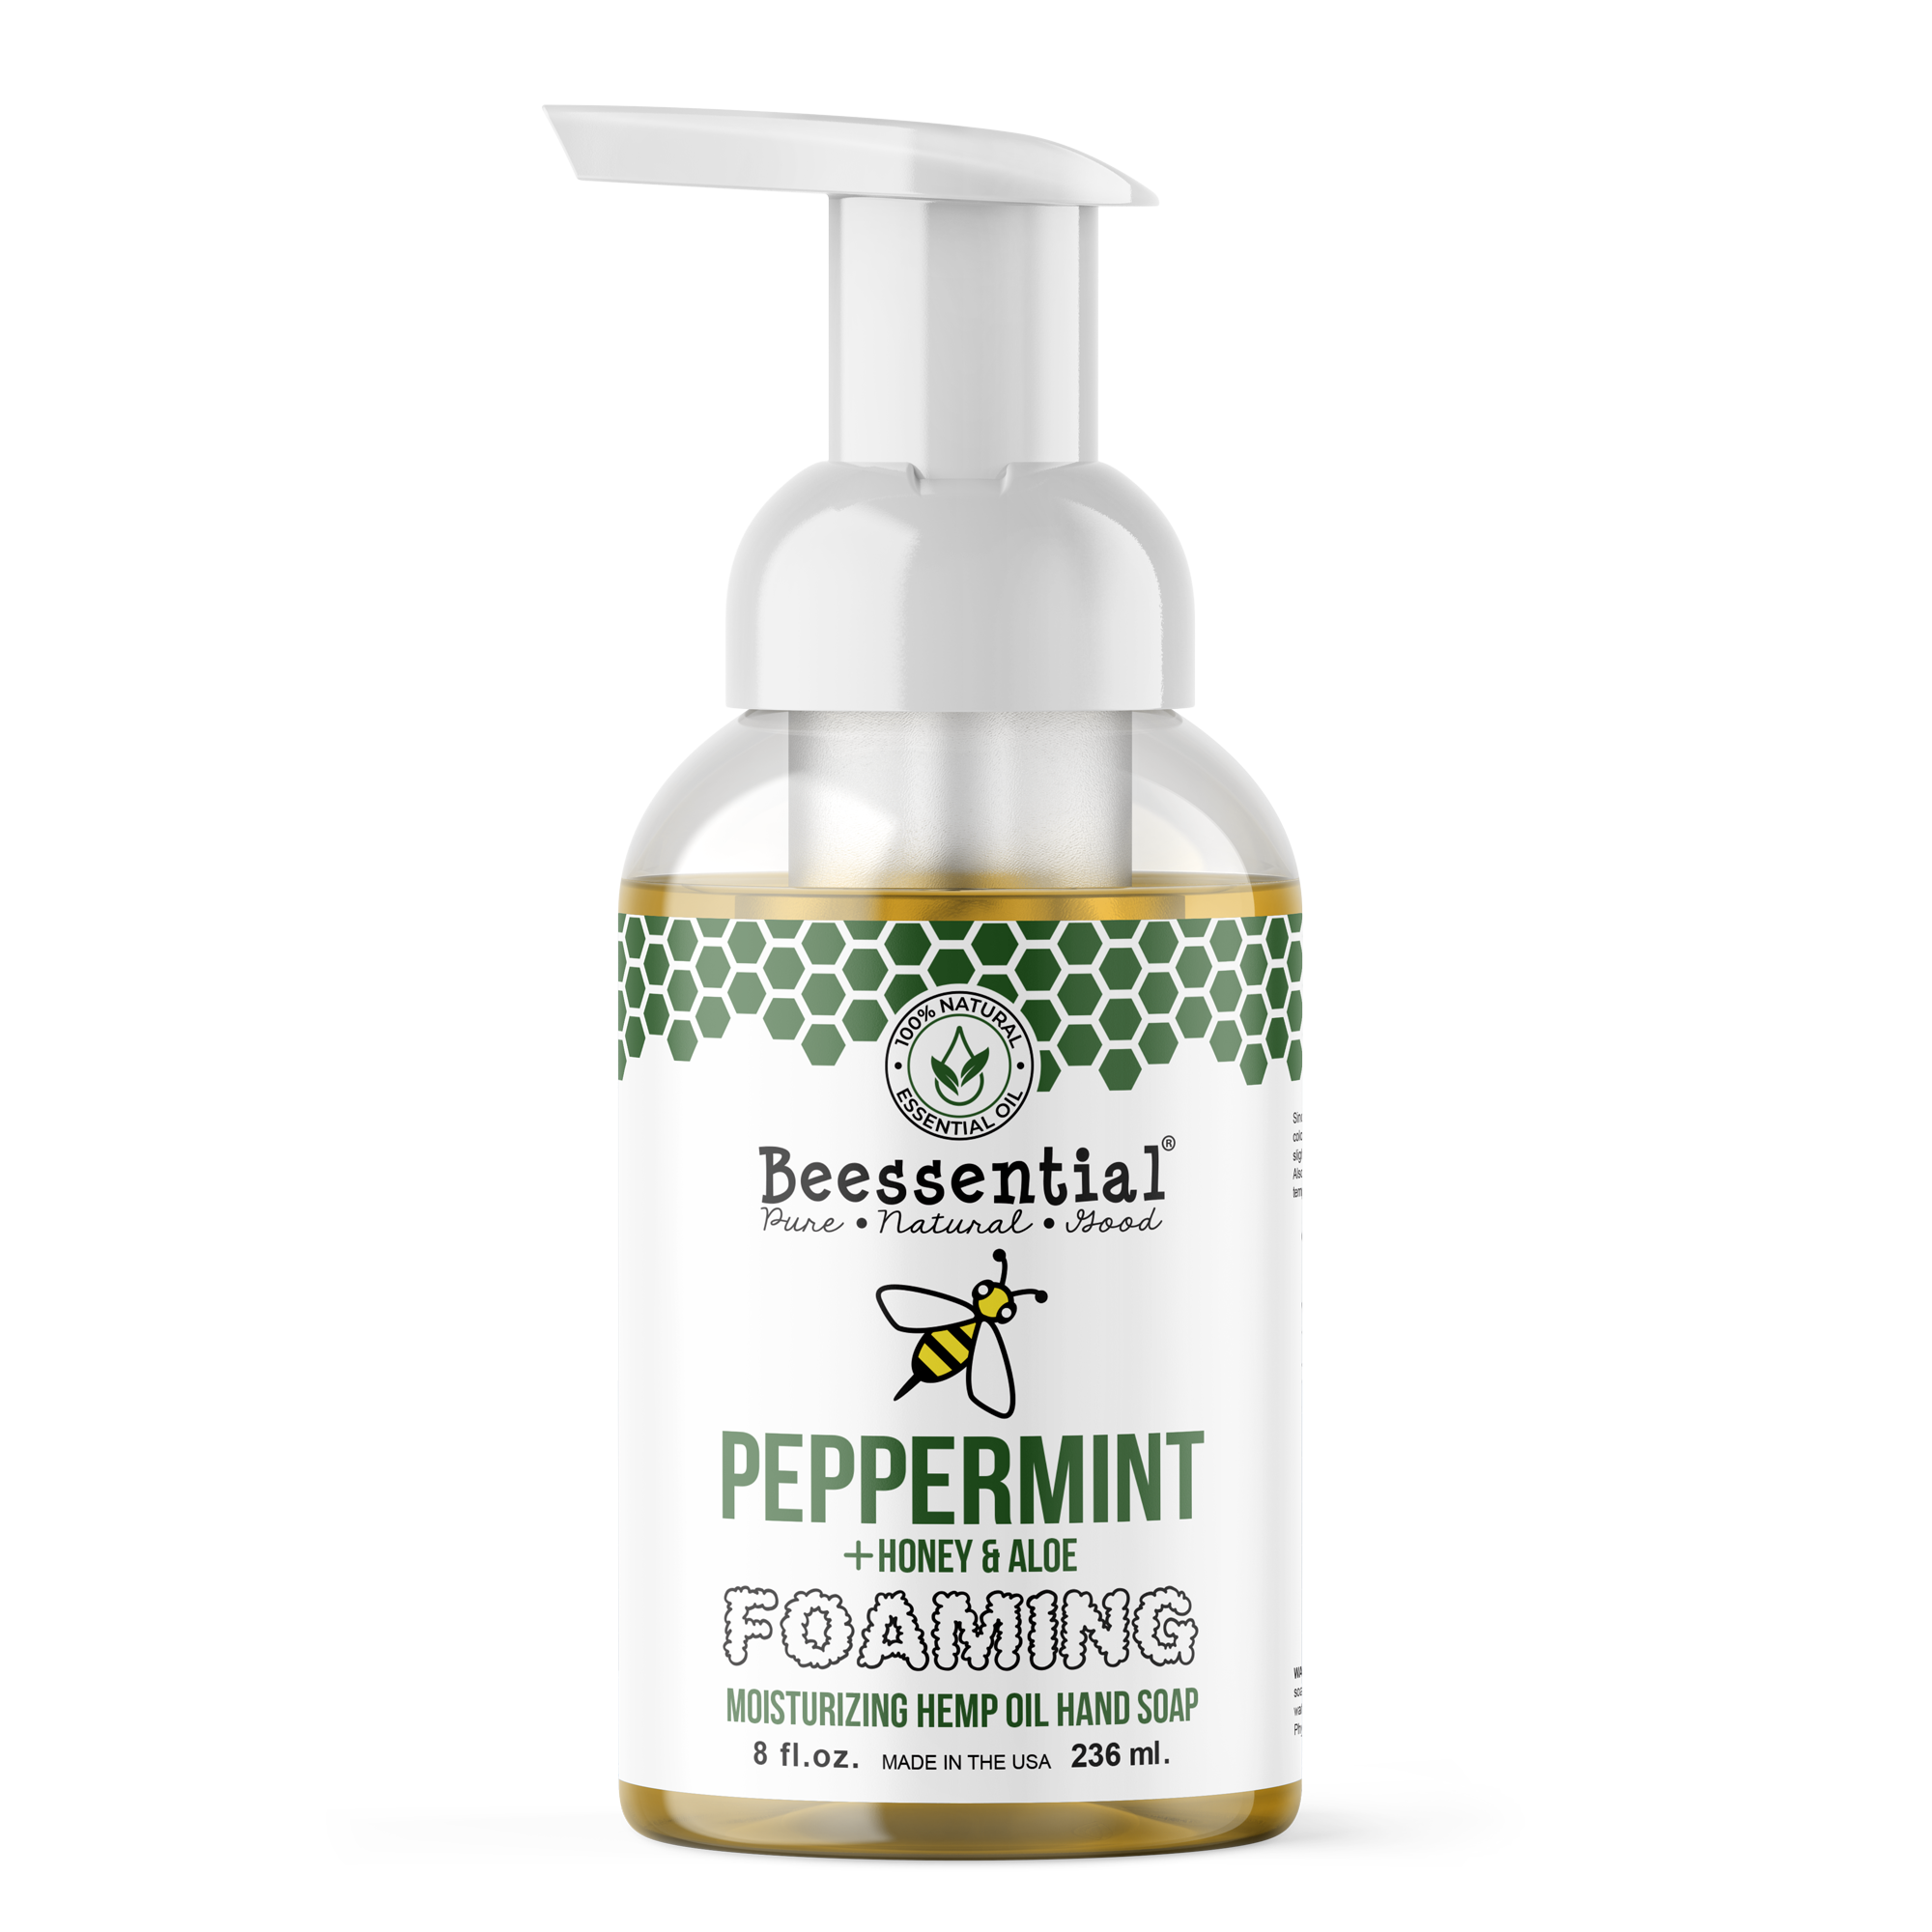 Beessential Peppermint Foaming Soap